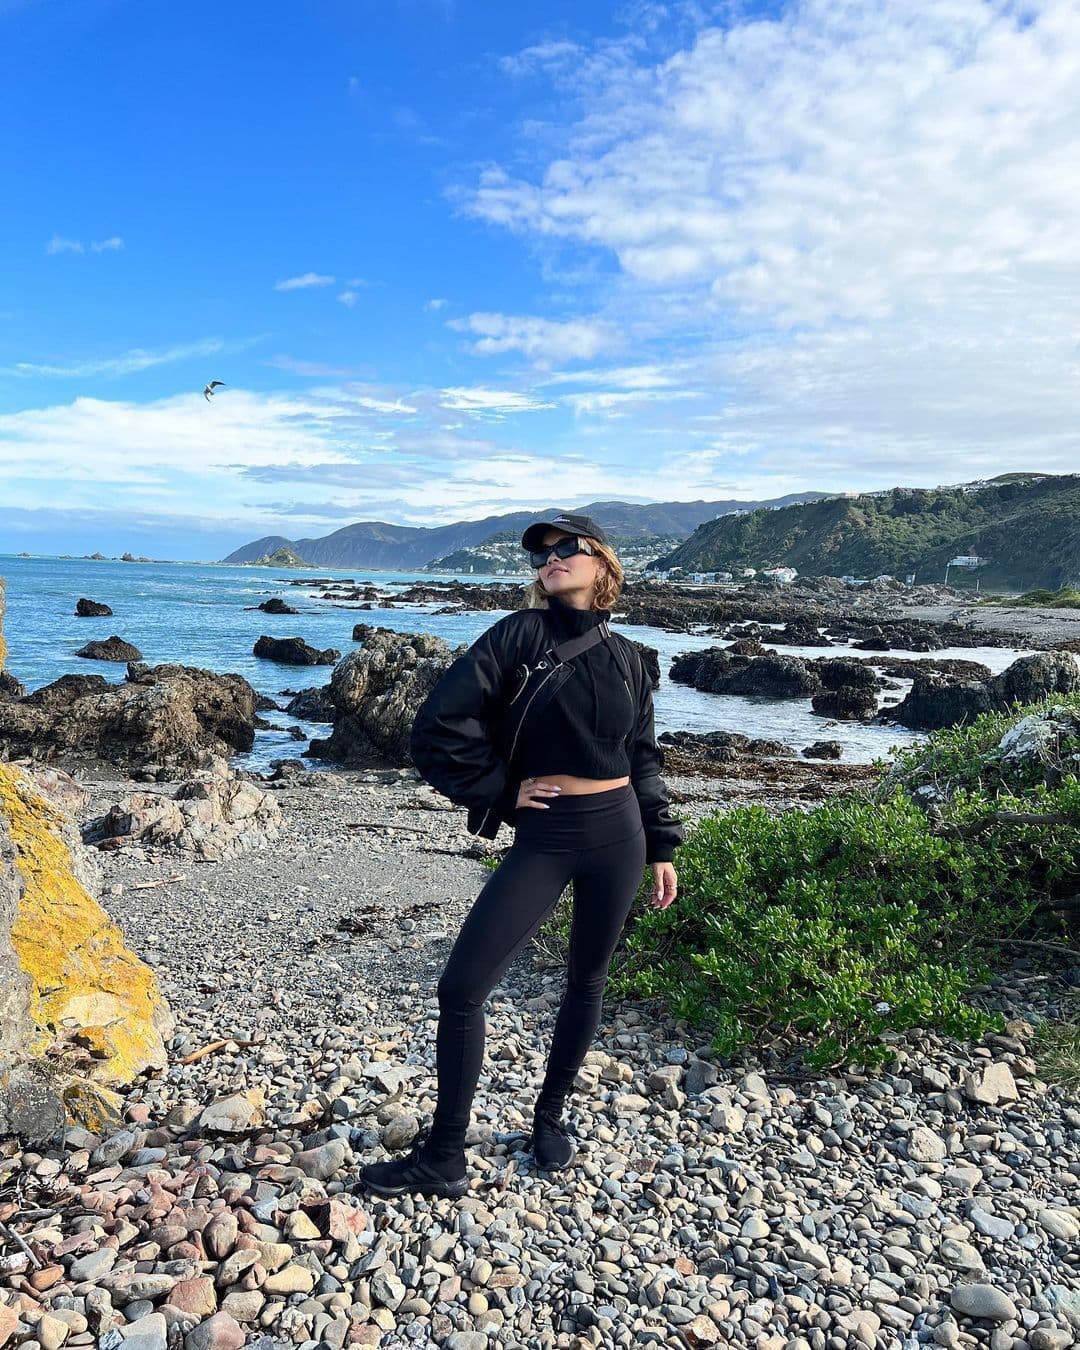 Rita Ora wearing a pair of black Alo leggings with a black bomber, sunglasses, and hat while standing on a rocky beach shoreline.  